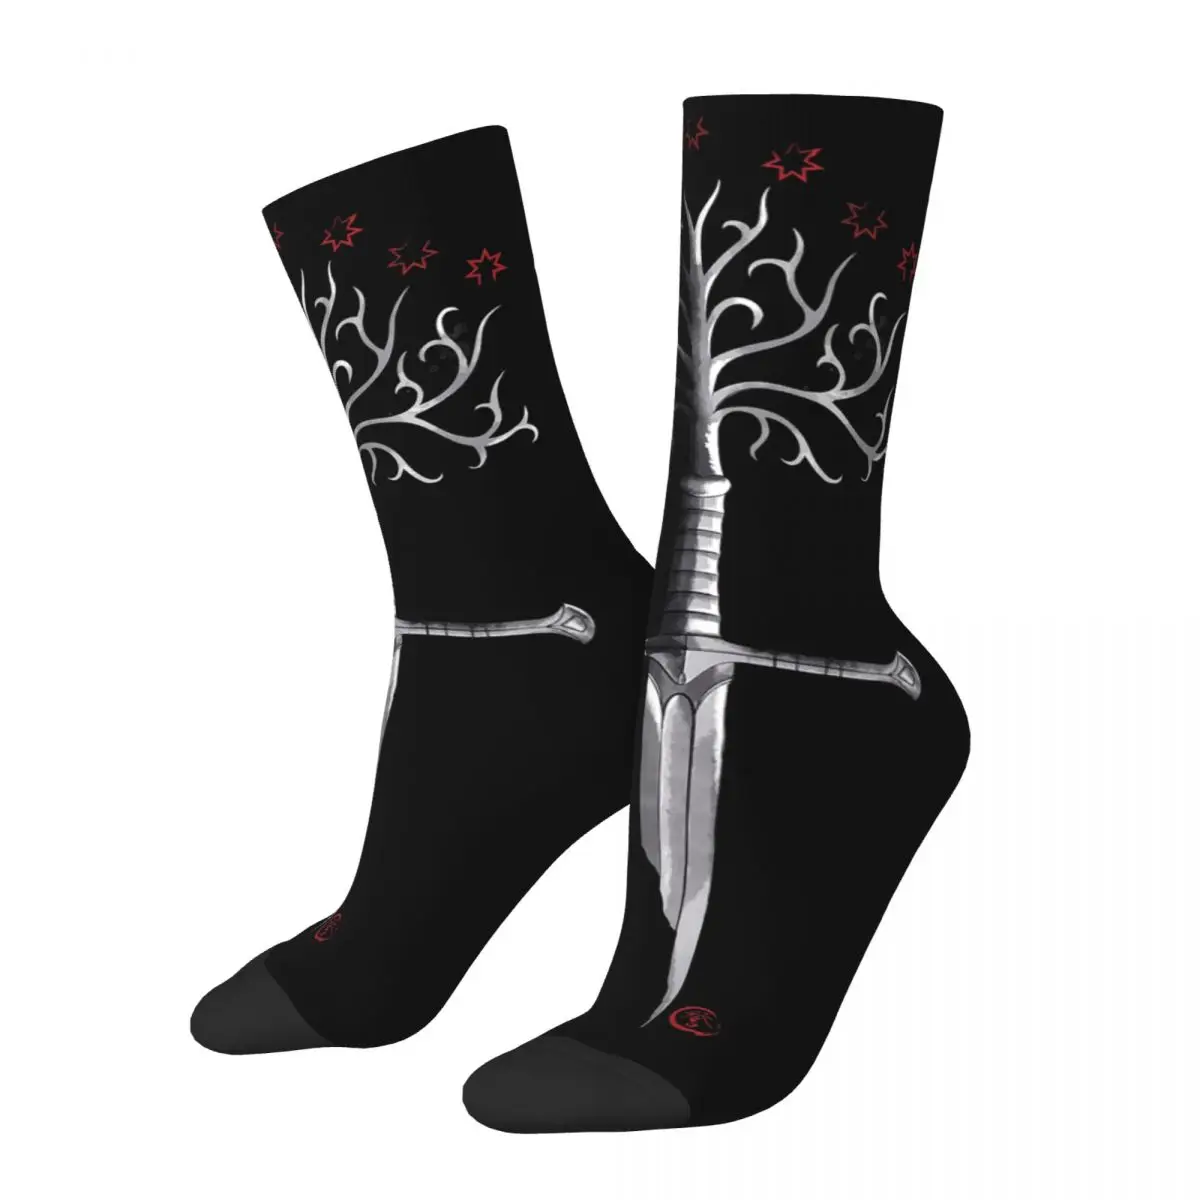 

Crew Socks Narsil Anduril Sword Of Gondor Merch for Male Compression Stockings Spring Autumn Winter Best Friend Gifts